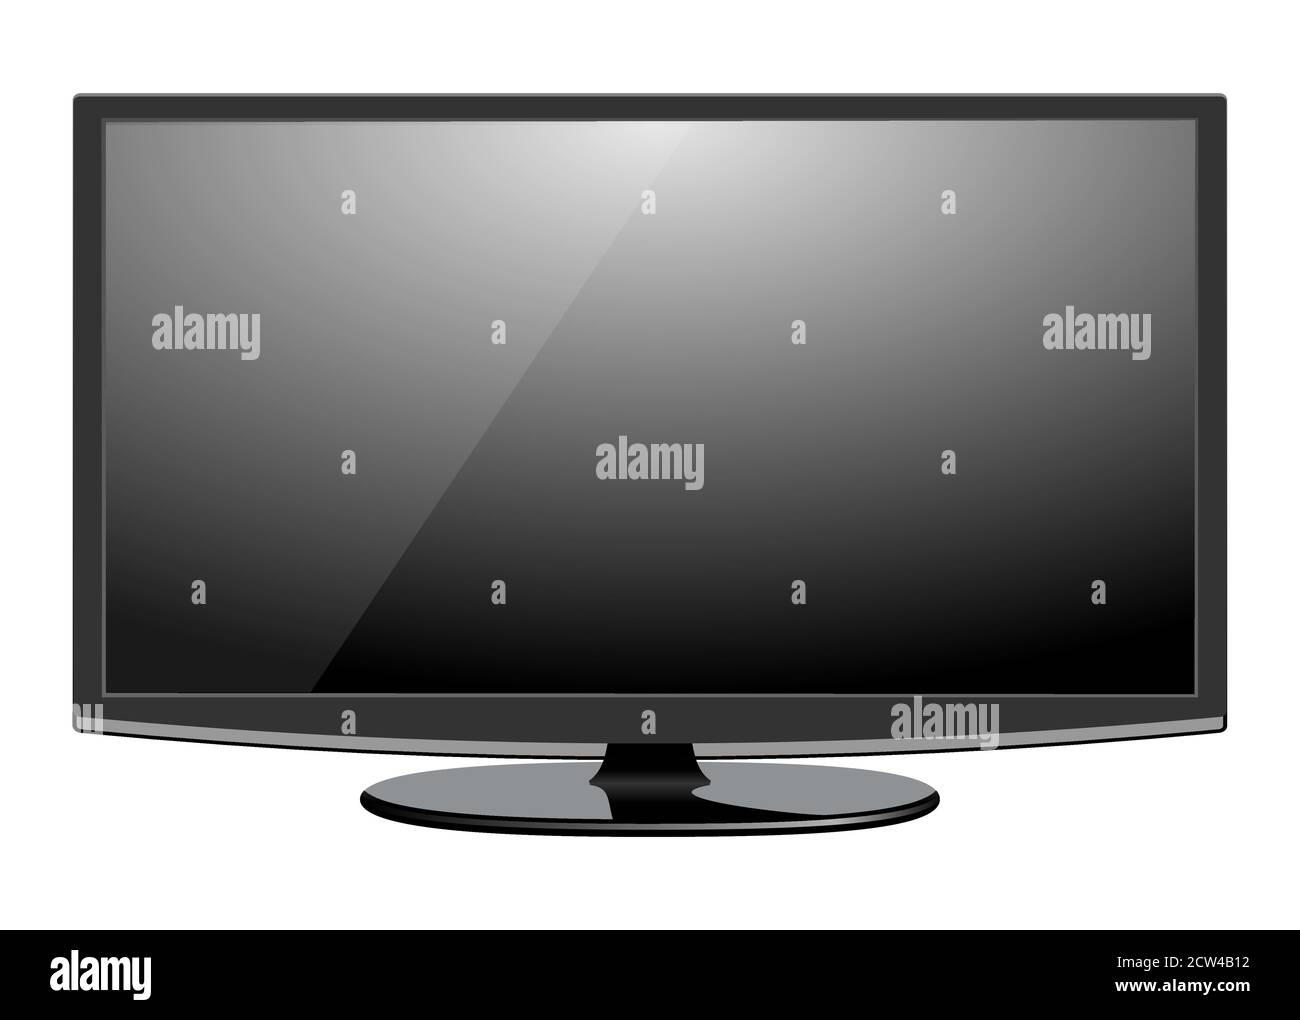 Led screen background Cut Out Stock Images & Pictures - Alamy